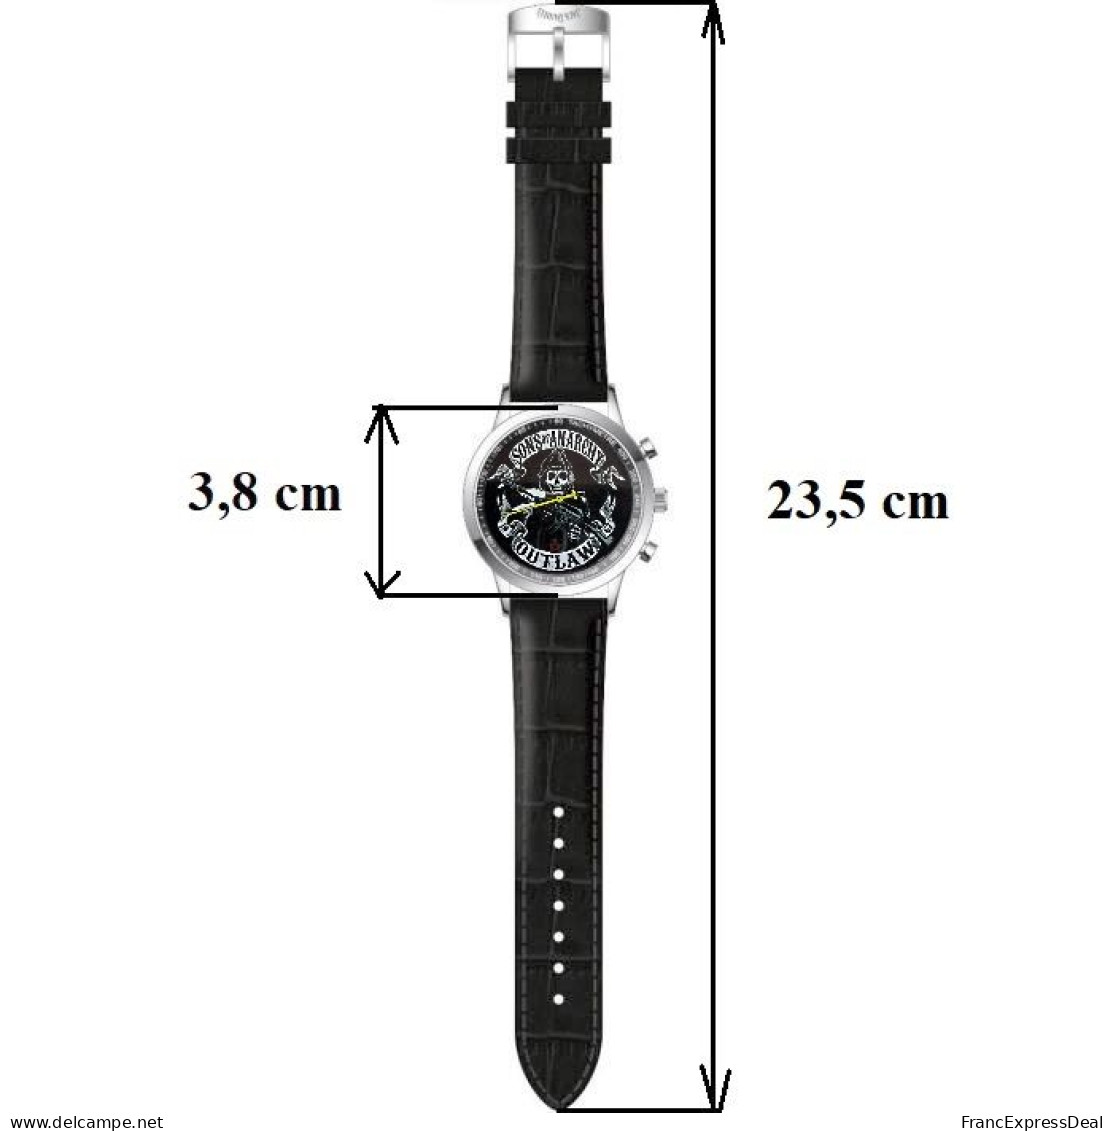 Montre NEUVE - Sons Of Anarchy Outlaw - Watches: Modern